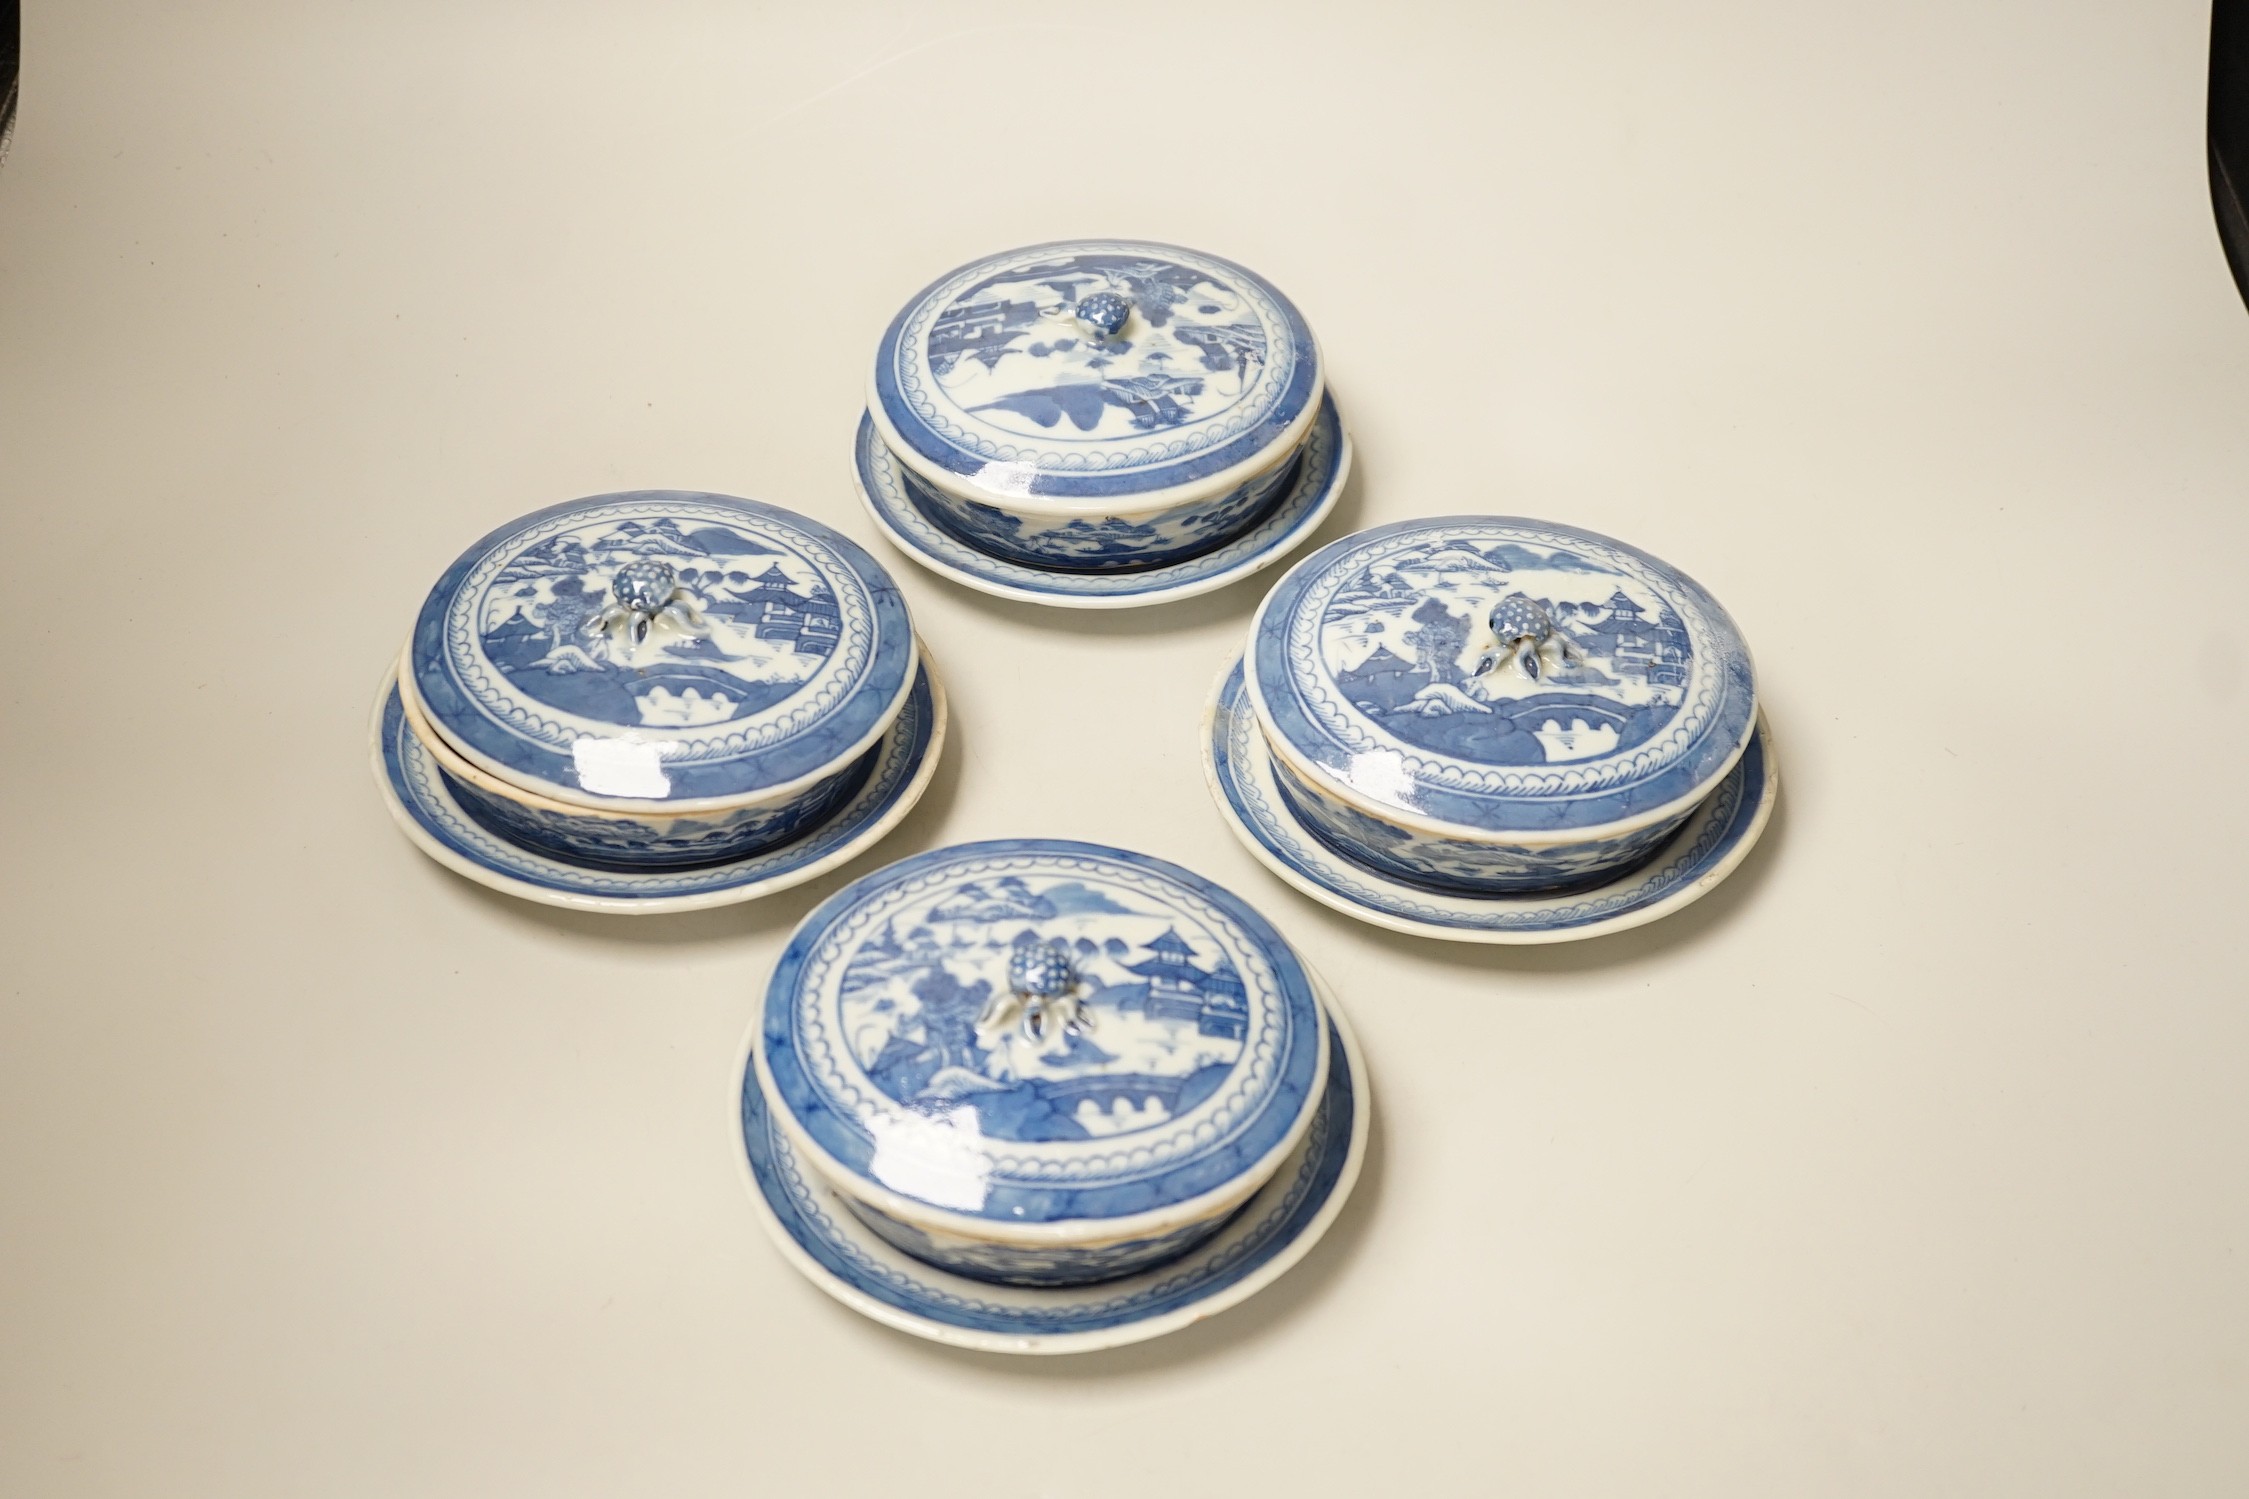 A set of four Chinese Export sauce tureens on stands, early 19th century. 7.5cm tall